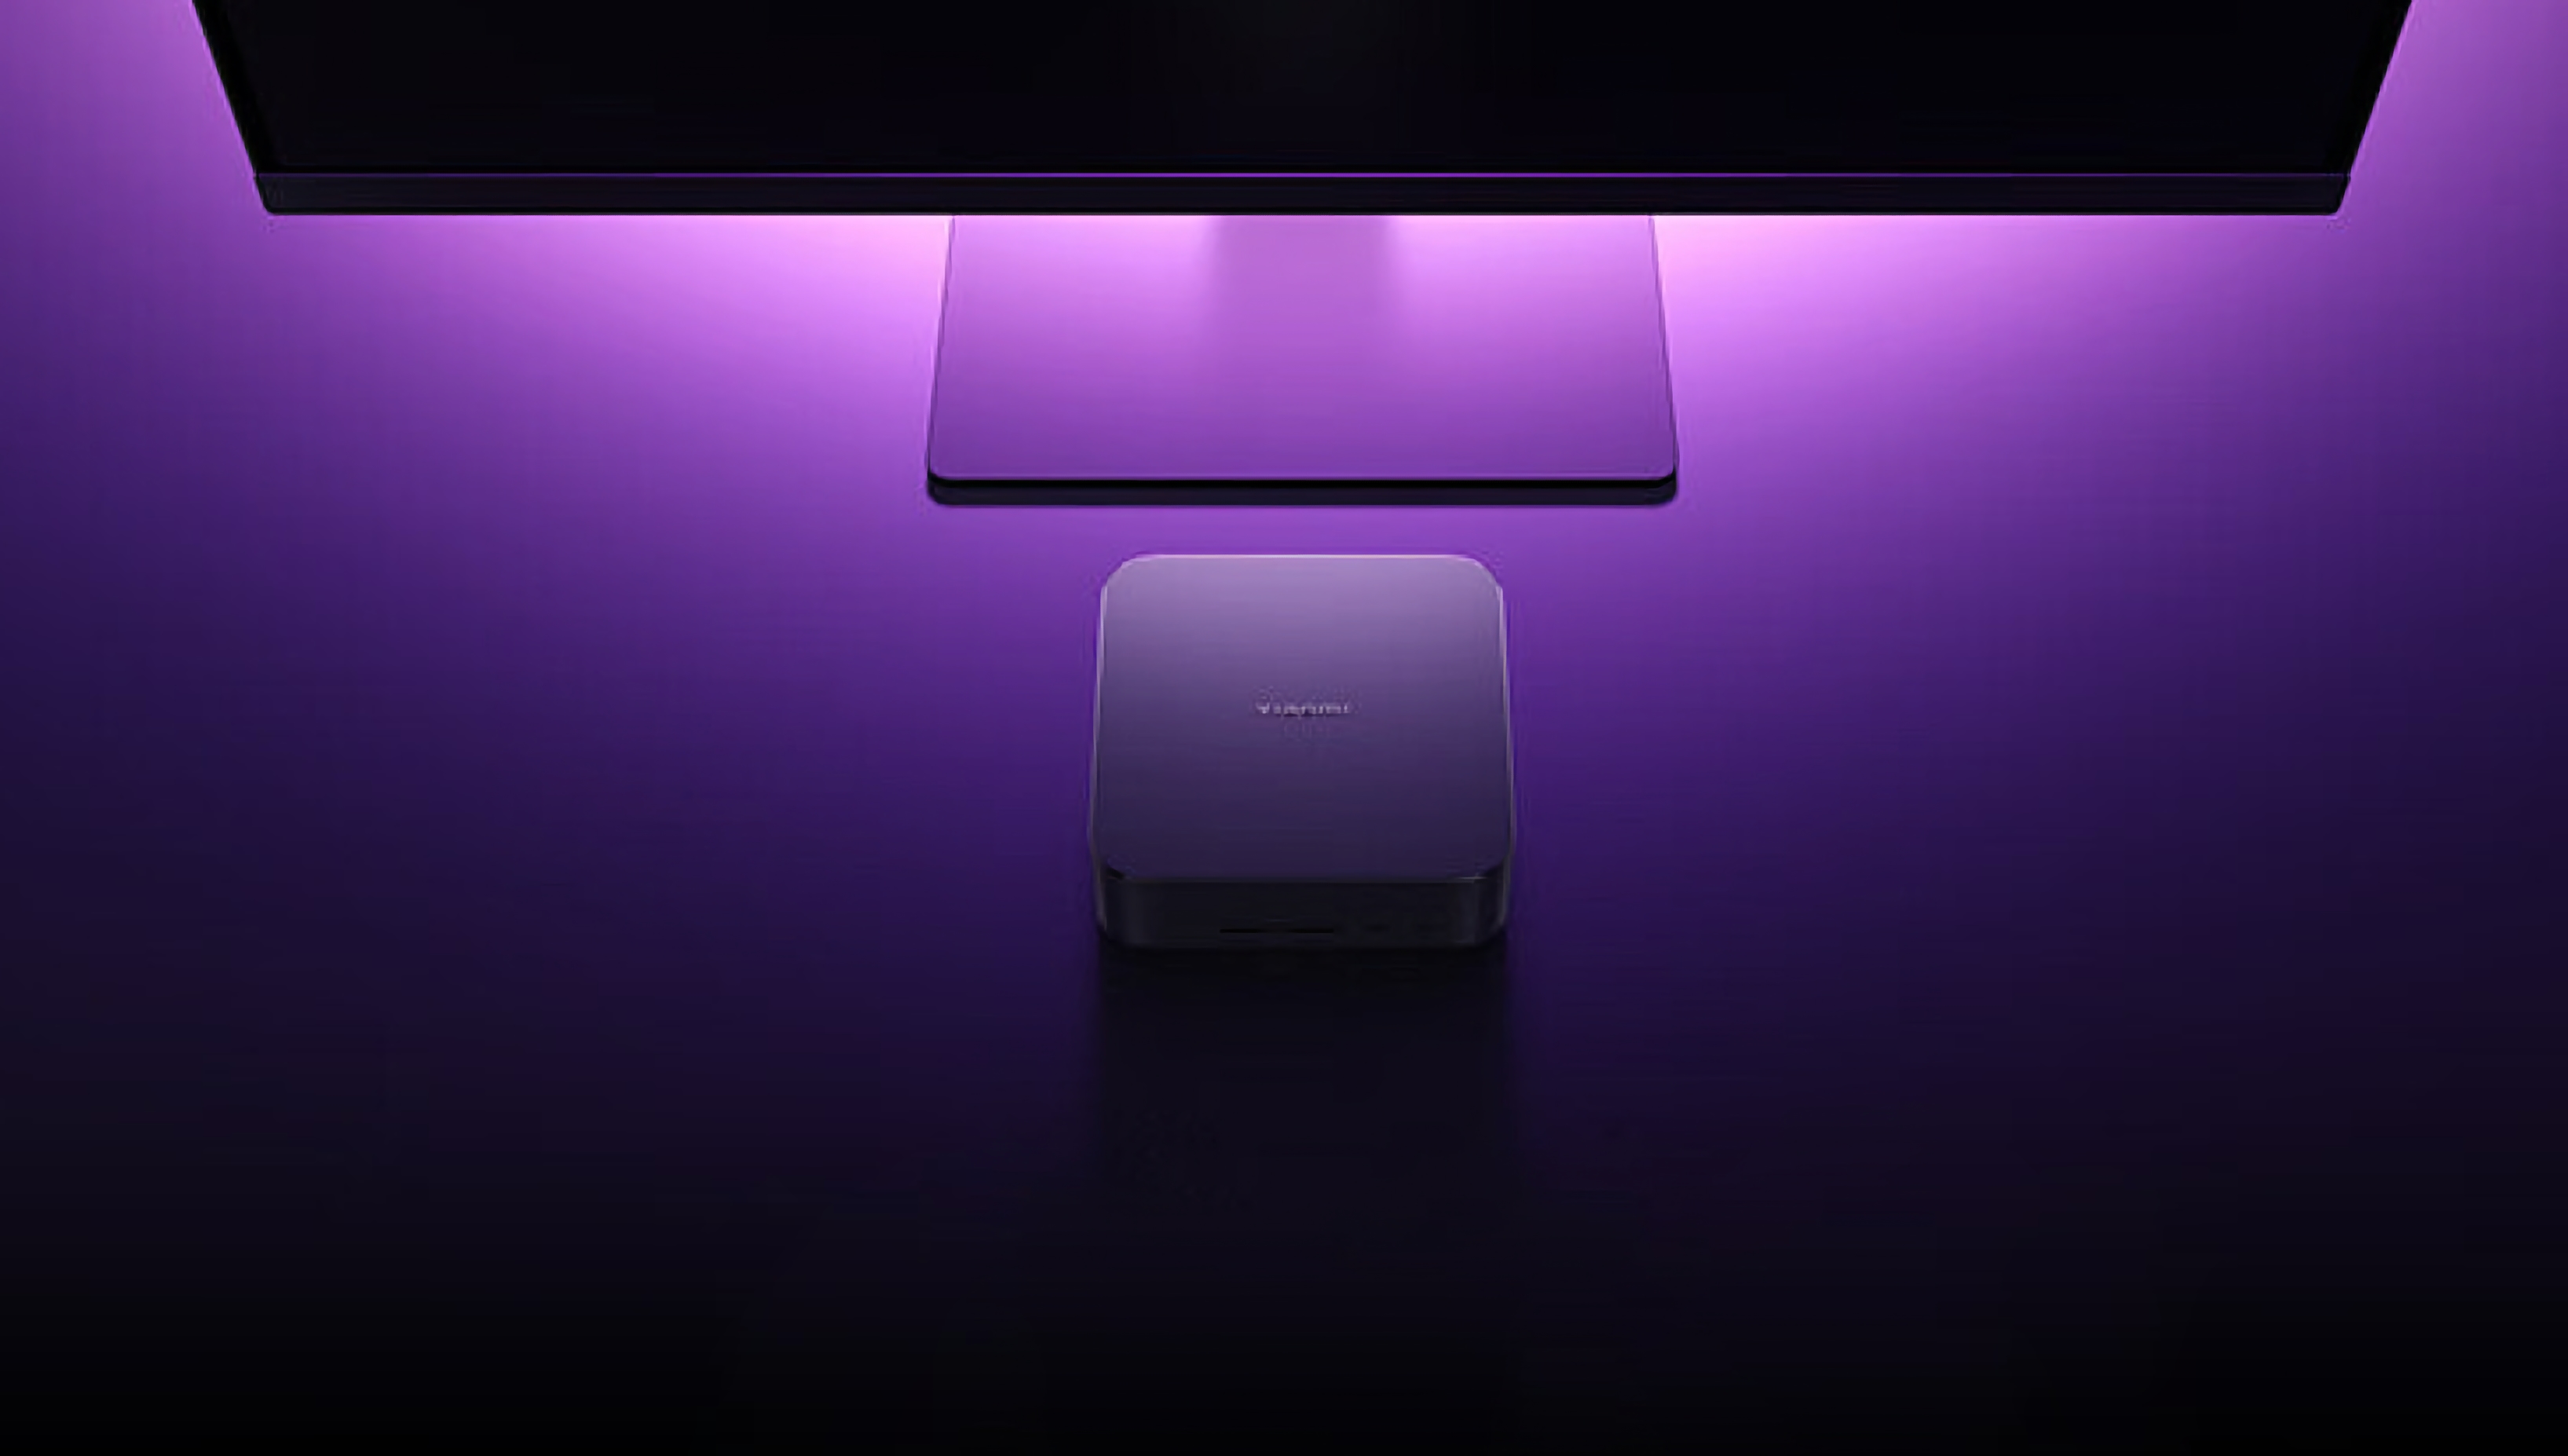 Xiaomi has unveiled the Mini PC 2023 with Intel Core i5-1340P processor, 16GB RAM and 512GB SSD drive